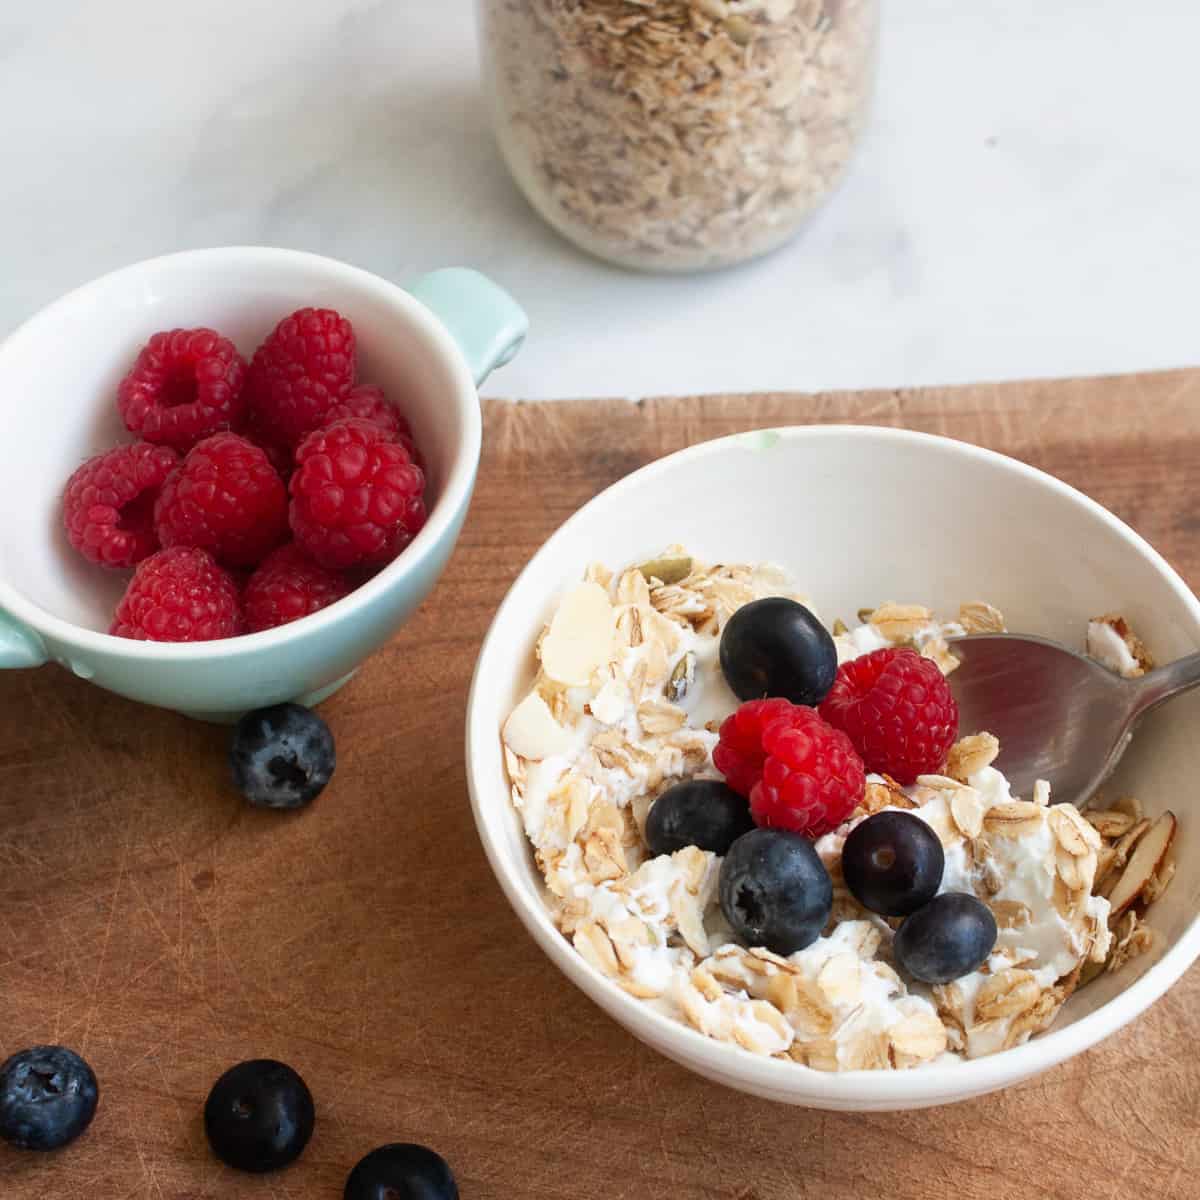 A bowl of gluten-free granola and yogurt topped with raspberries and blueberries.